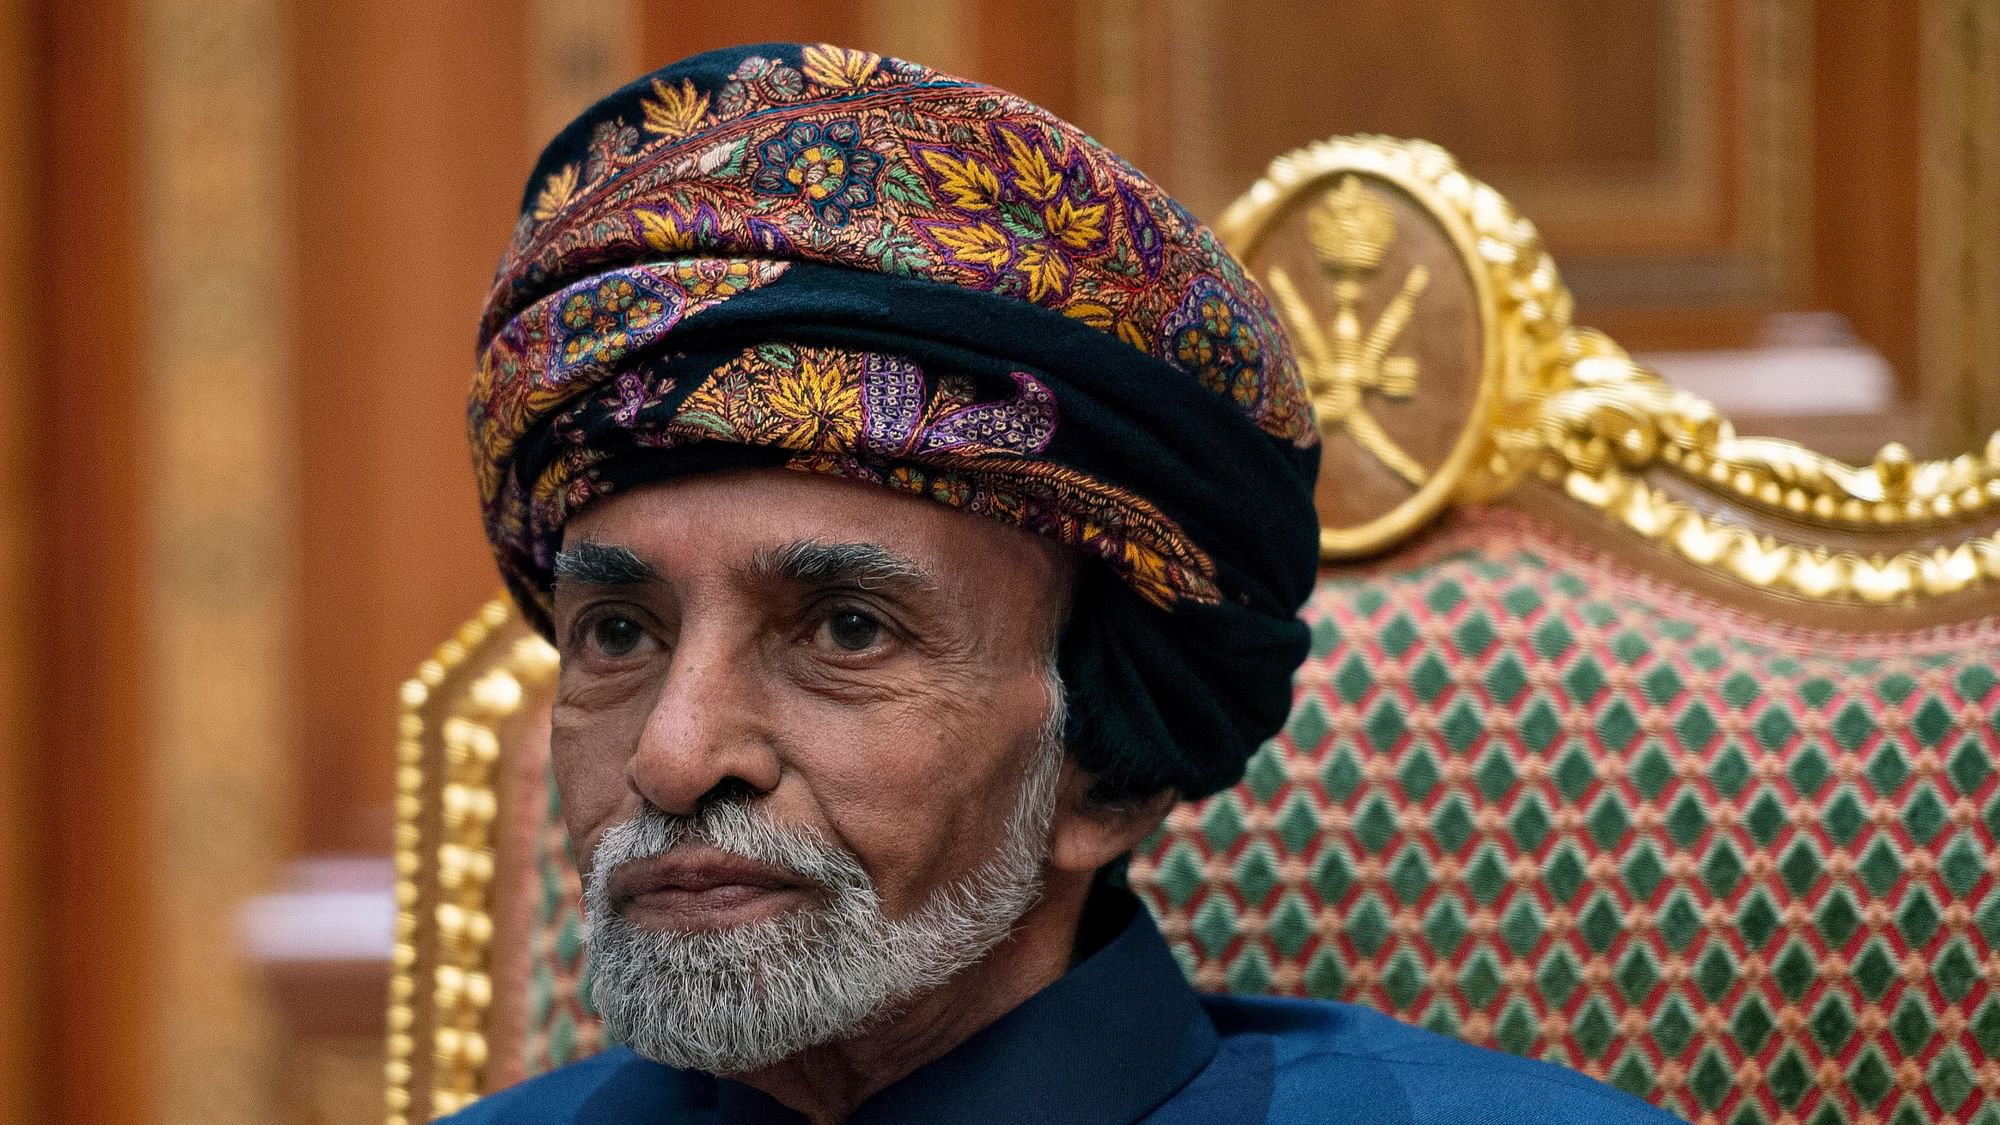 The state-run Oman News Agency announced his death late Friday on its official Twitter account.